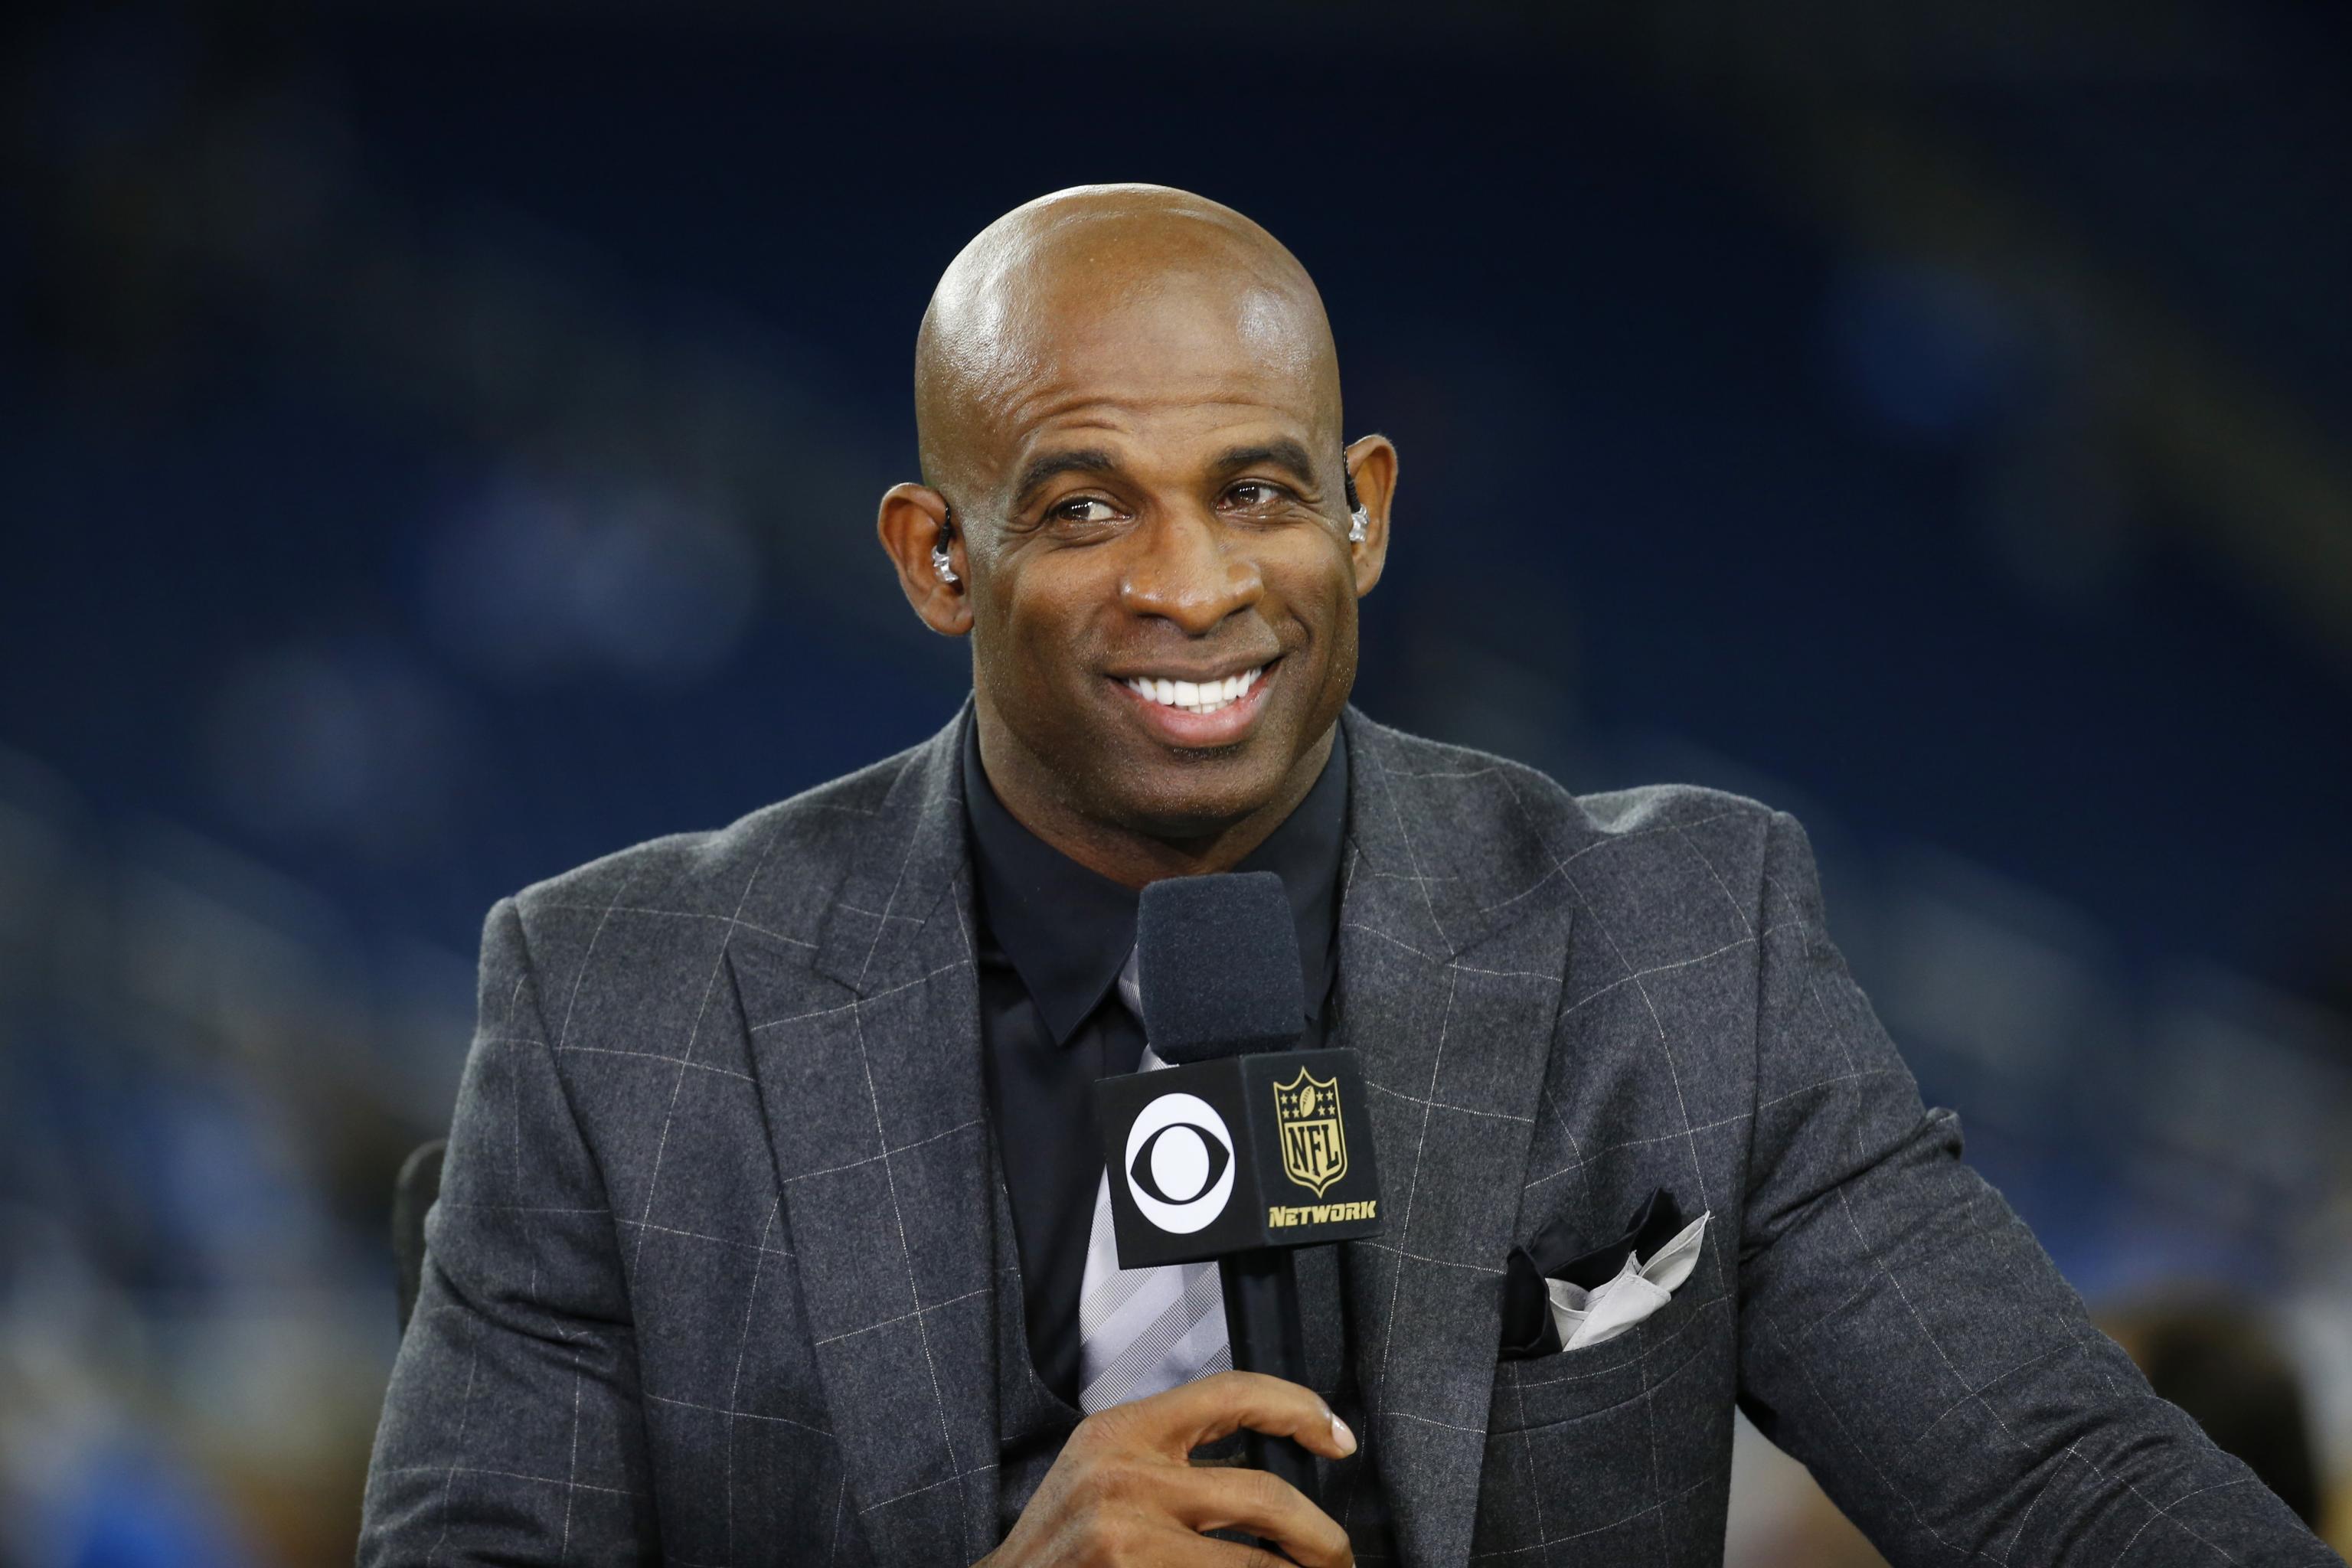 The Daily Nole - Dec. 29, 2017: Deion Sanders Interested in Coaching at FSU  - The Daily Nole